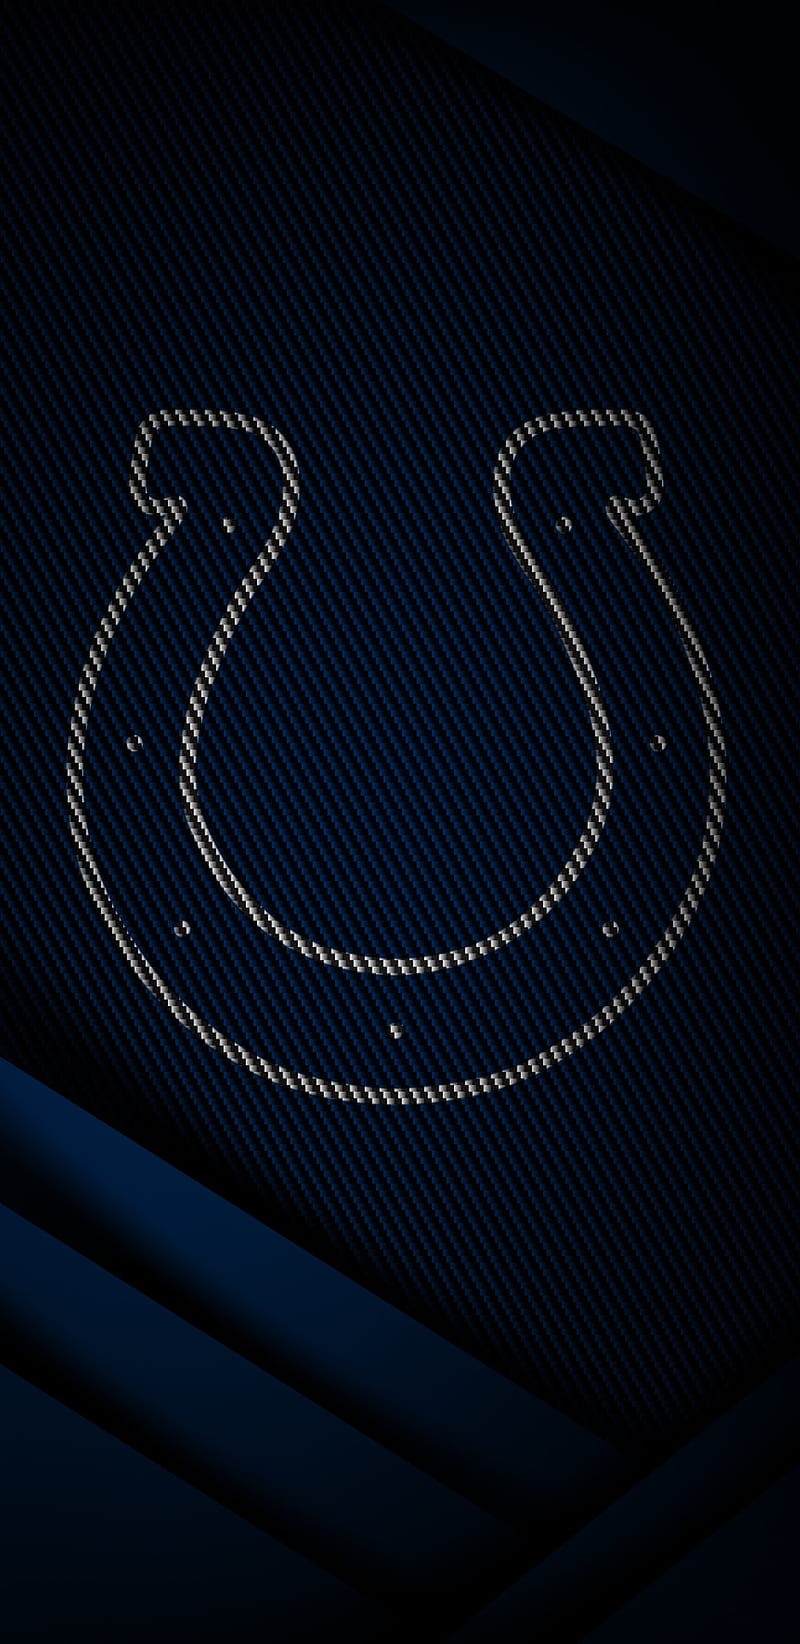 indianapolis colts wallpaper iphone